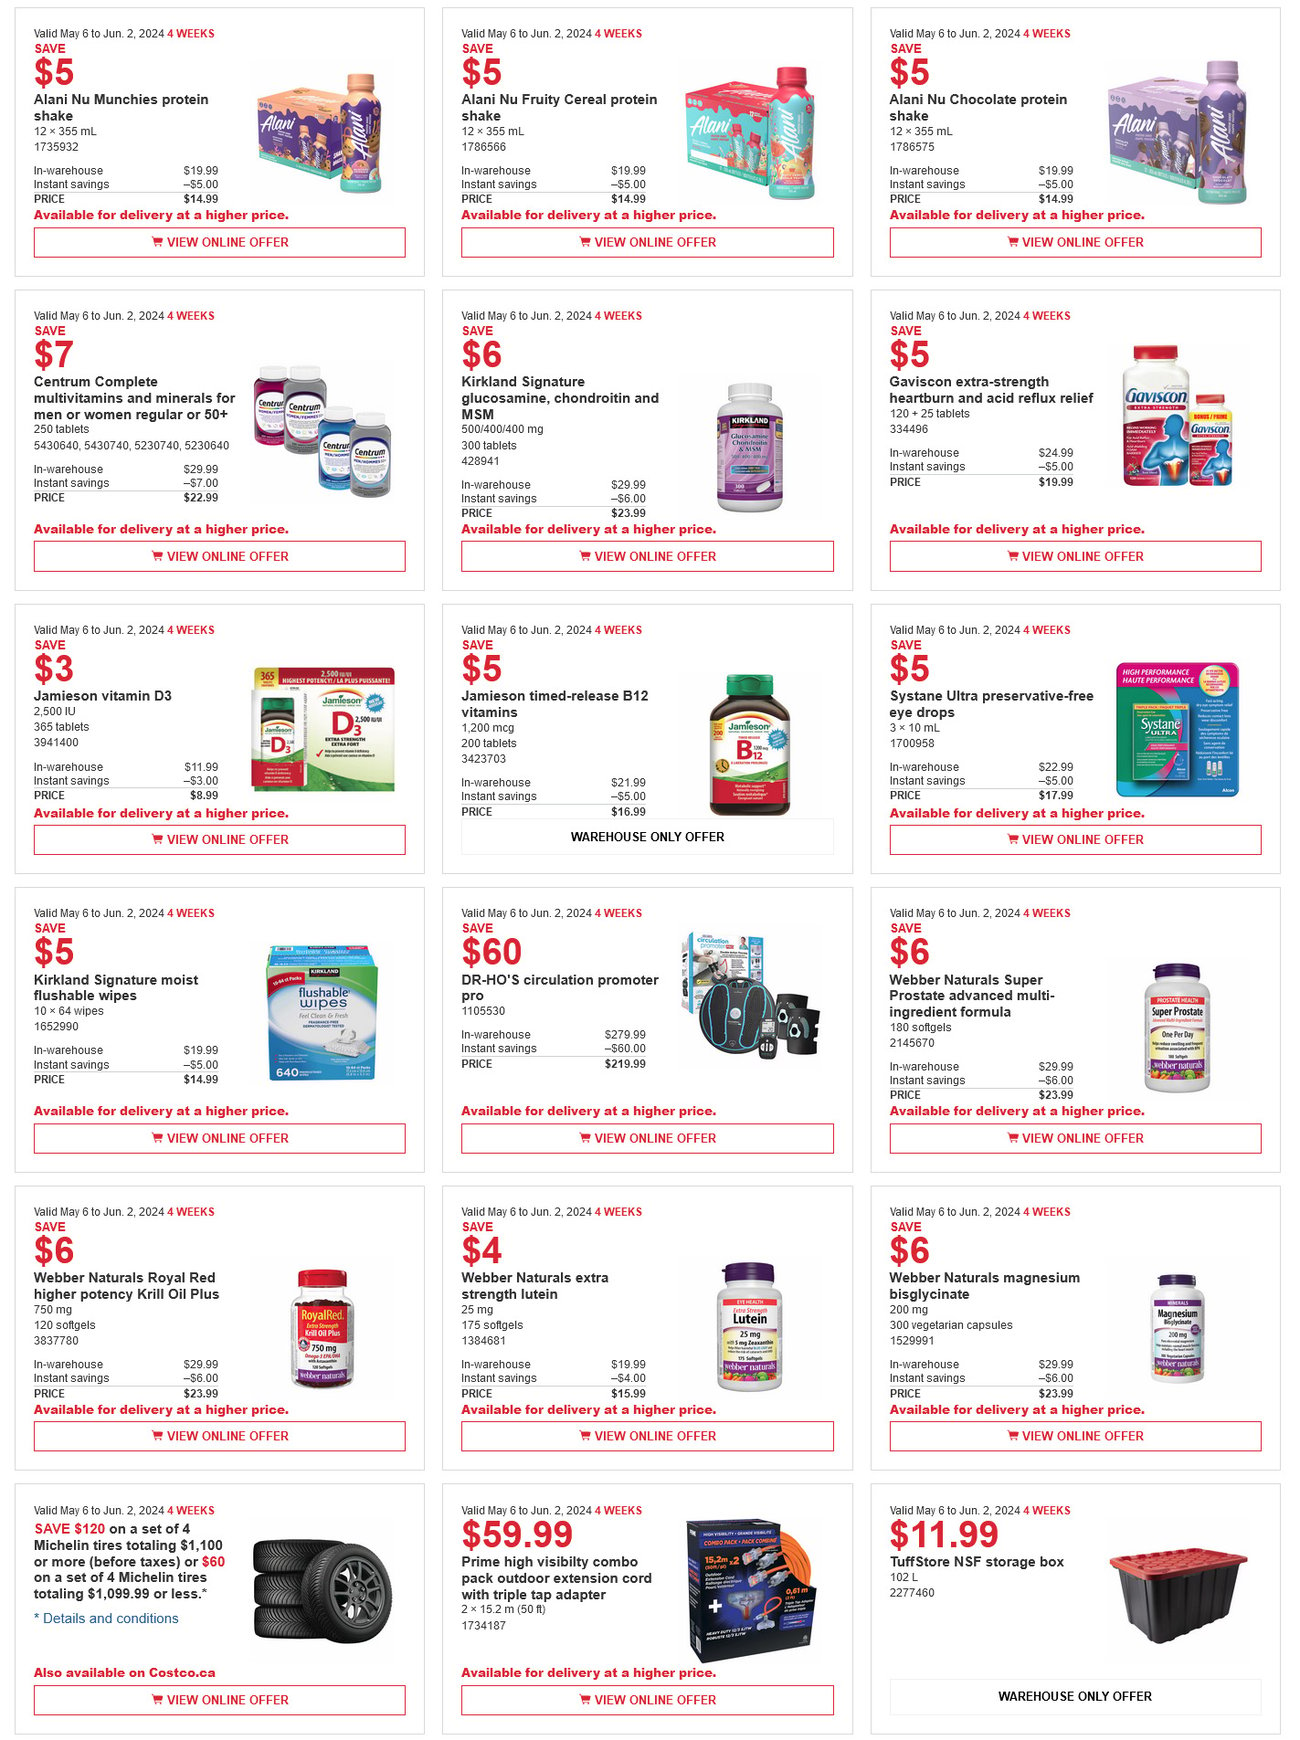 Costco Flyer - Savings & Coupons at your Local Warehouse and Online - Page 7